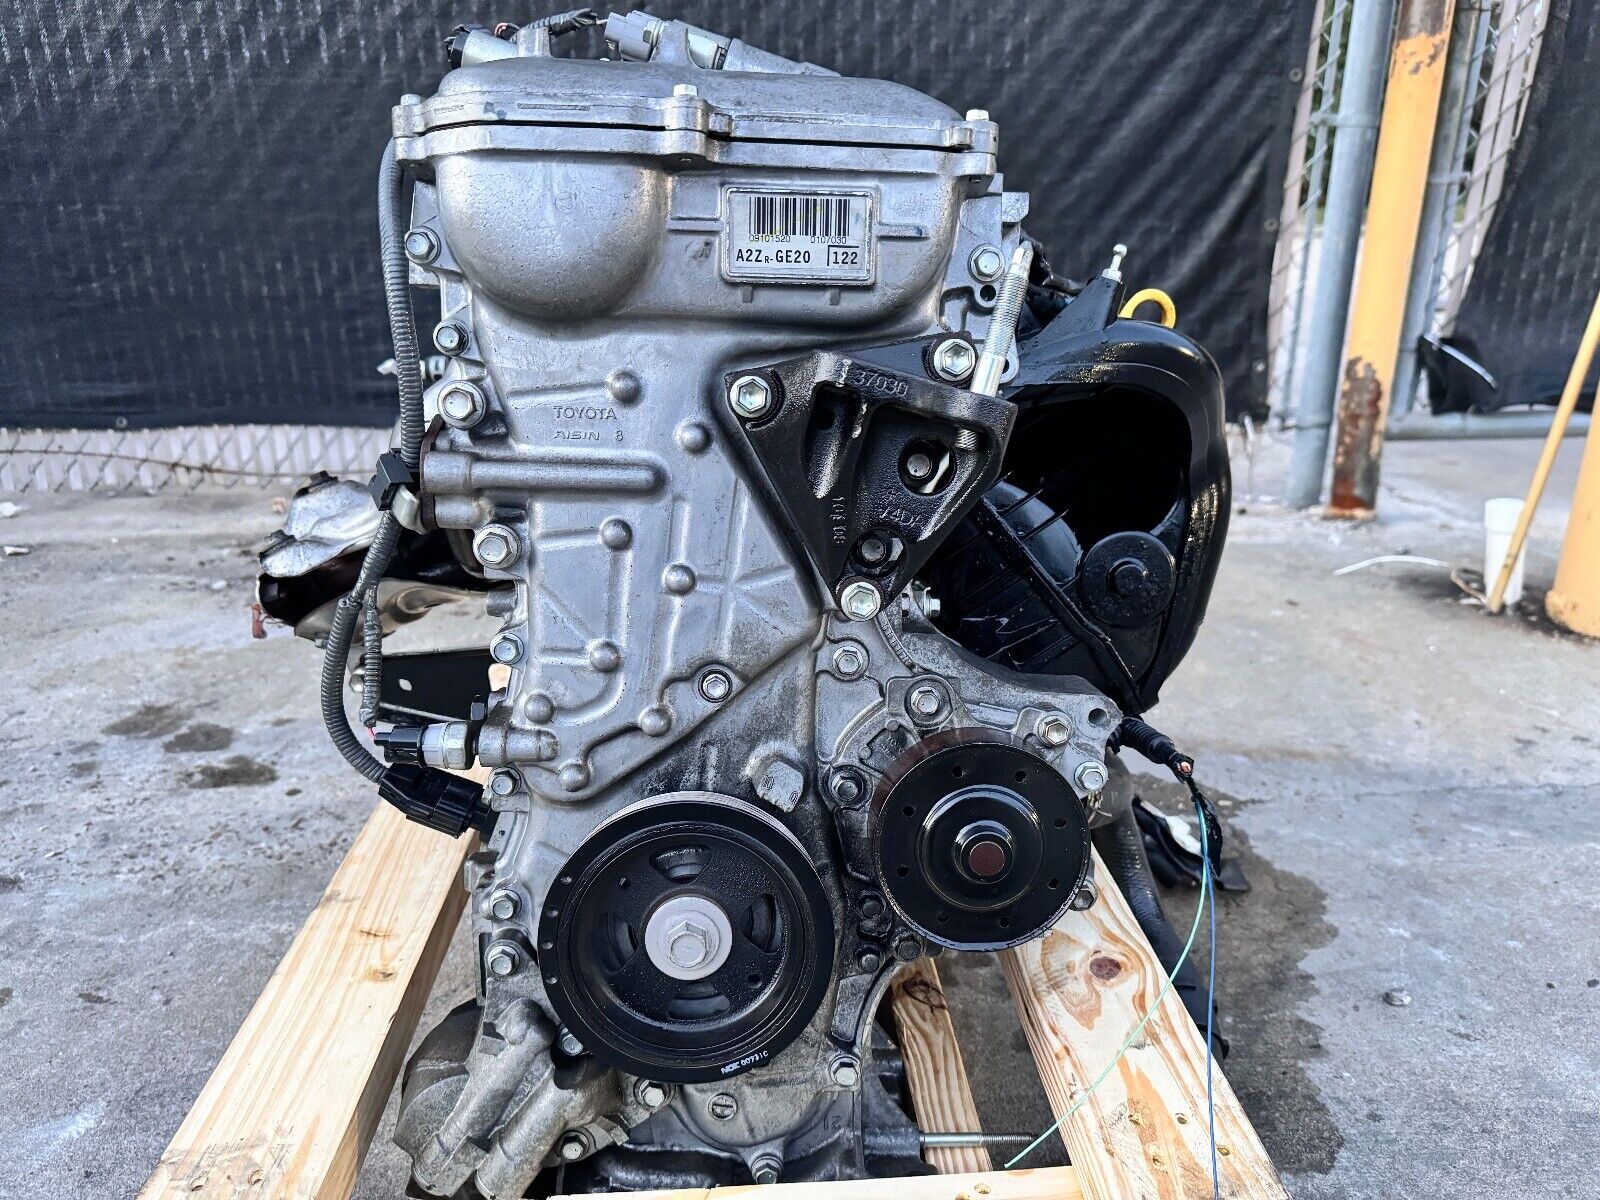 2014-2019 Toyota Corolla JDM 2ZR-FAE 1.8L 4 Cylinder Engine, Imported From Japan